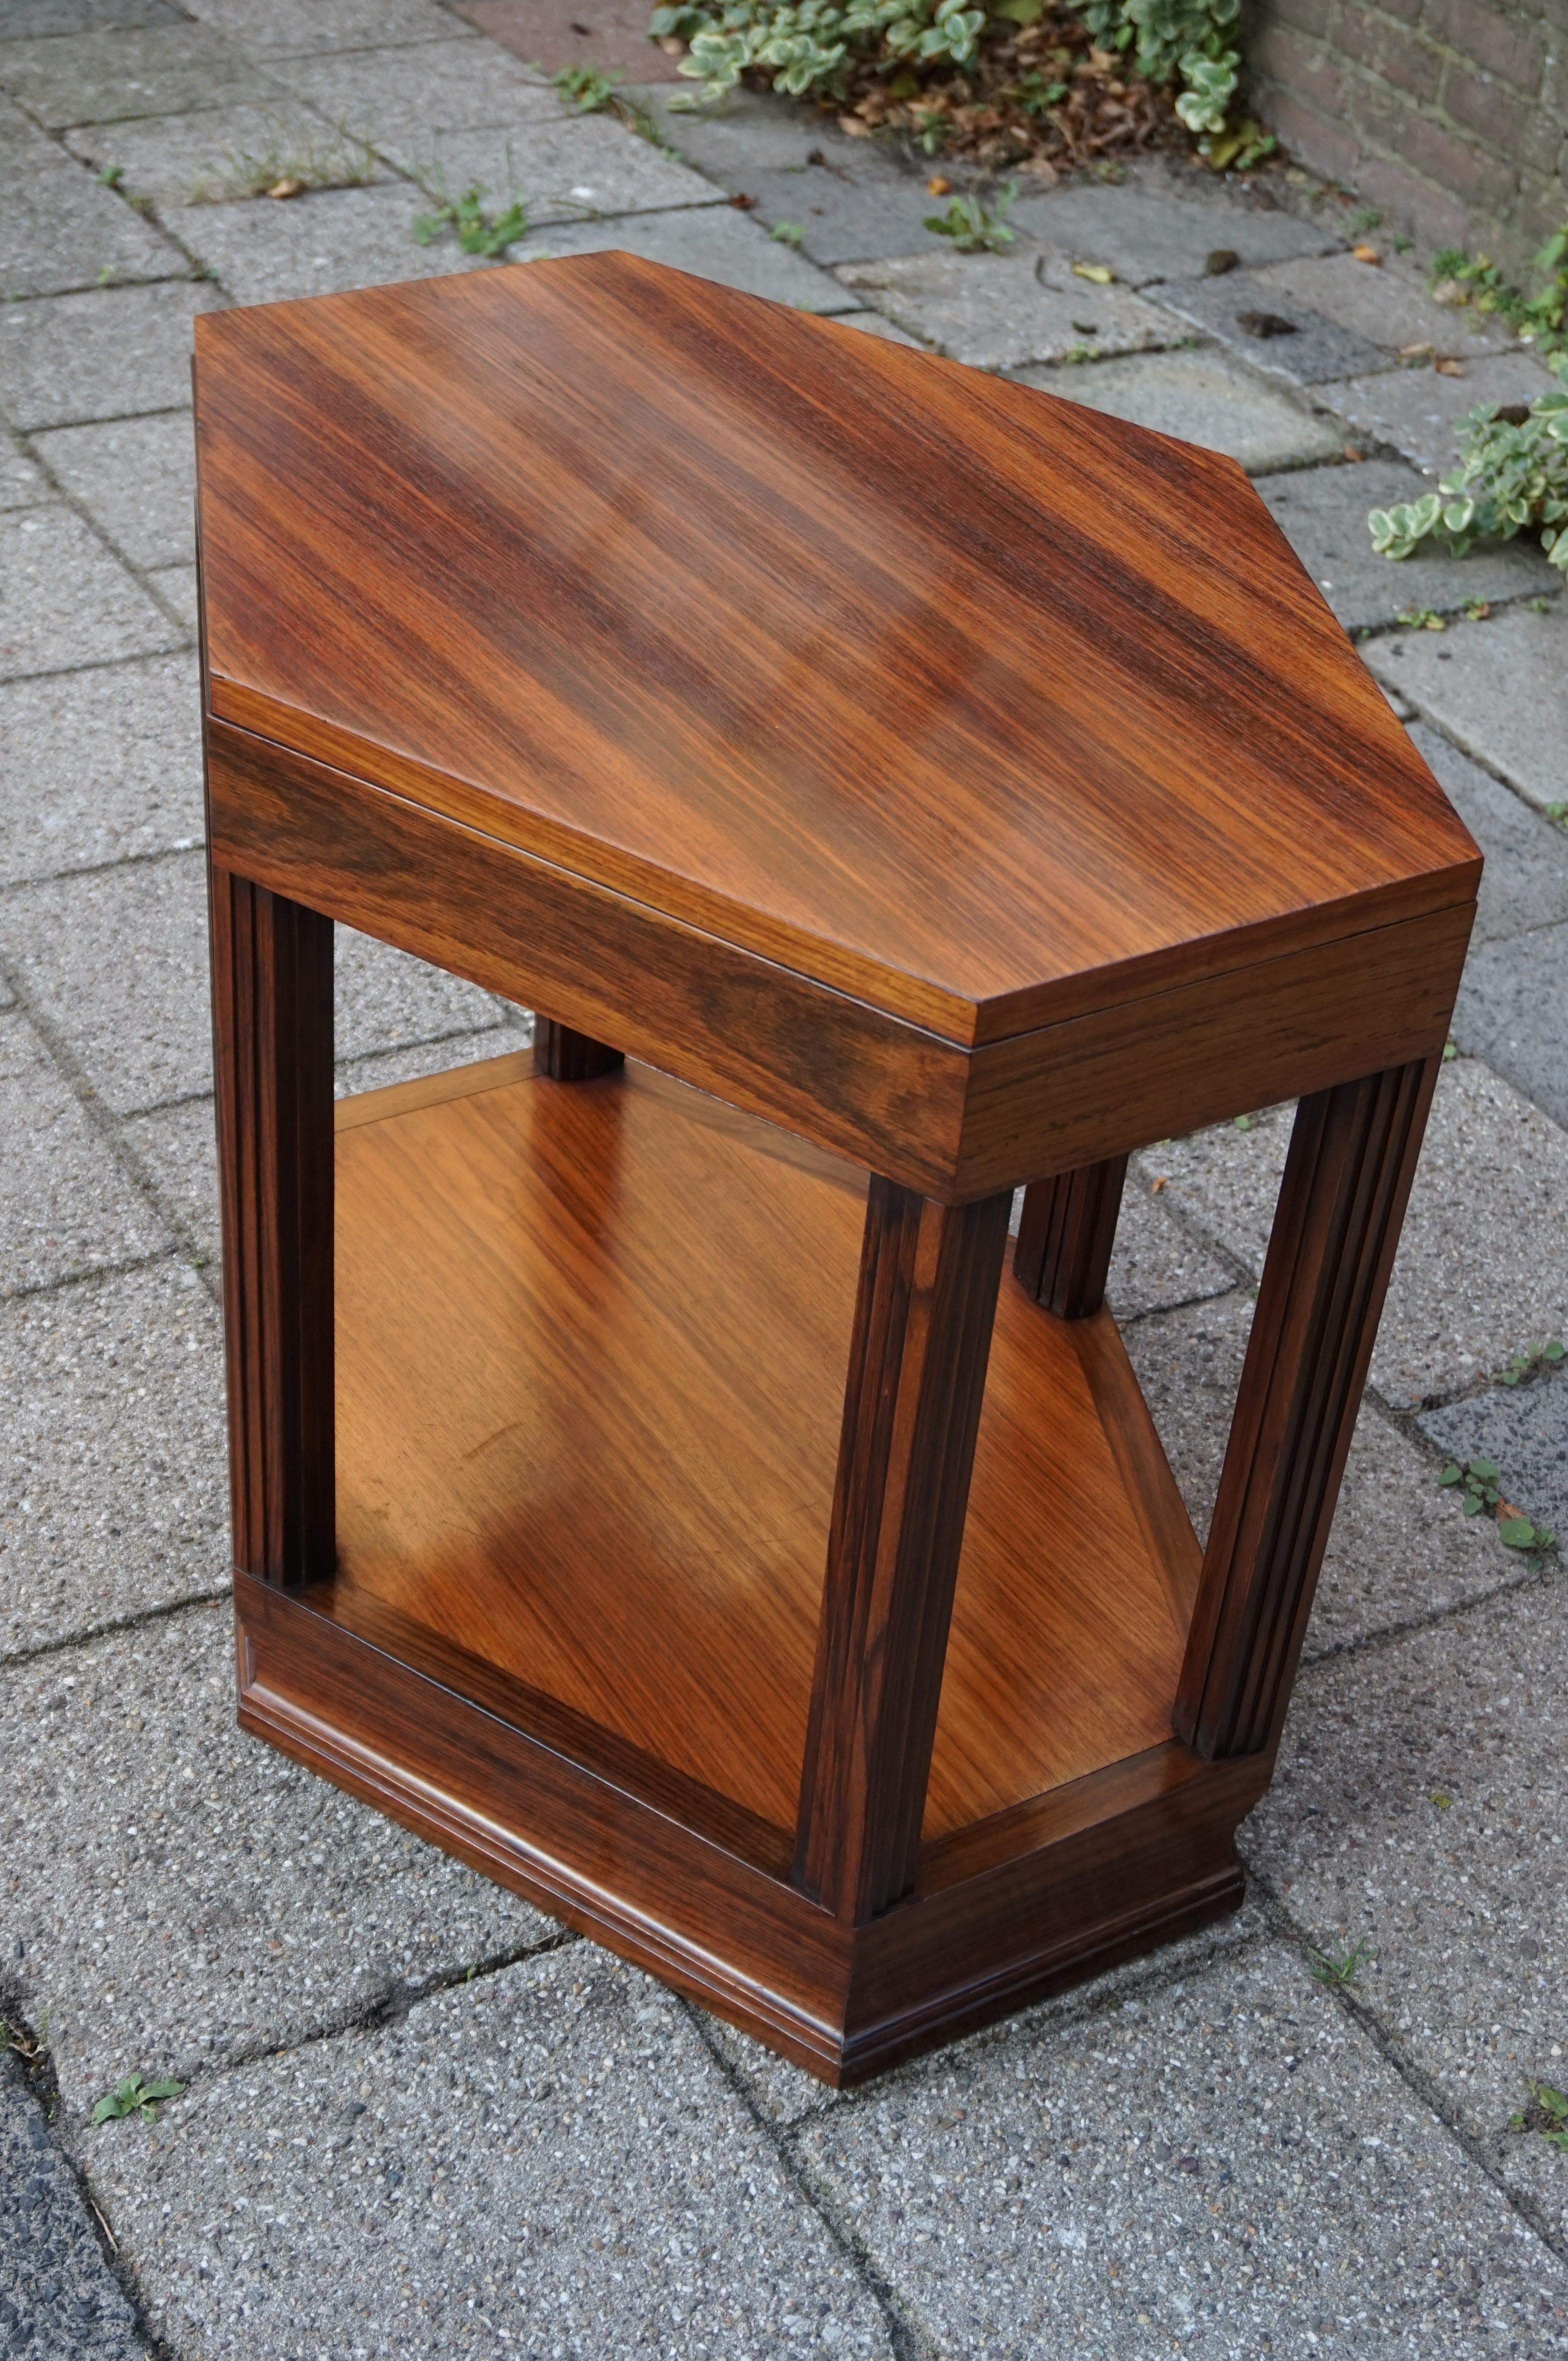 Stunning and Excellent Condition Coromandel Art Deco Coffee or Sofa Table 1920 For Sale 5